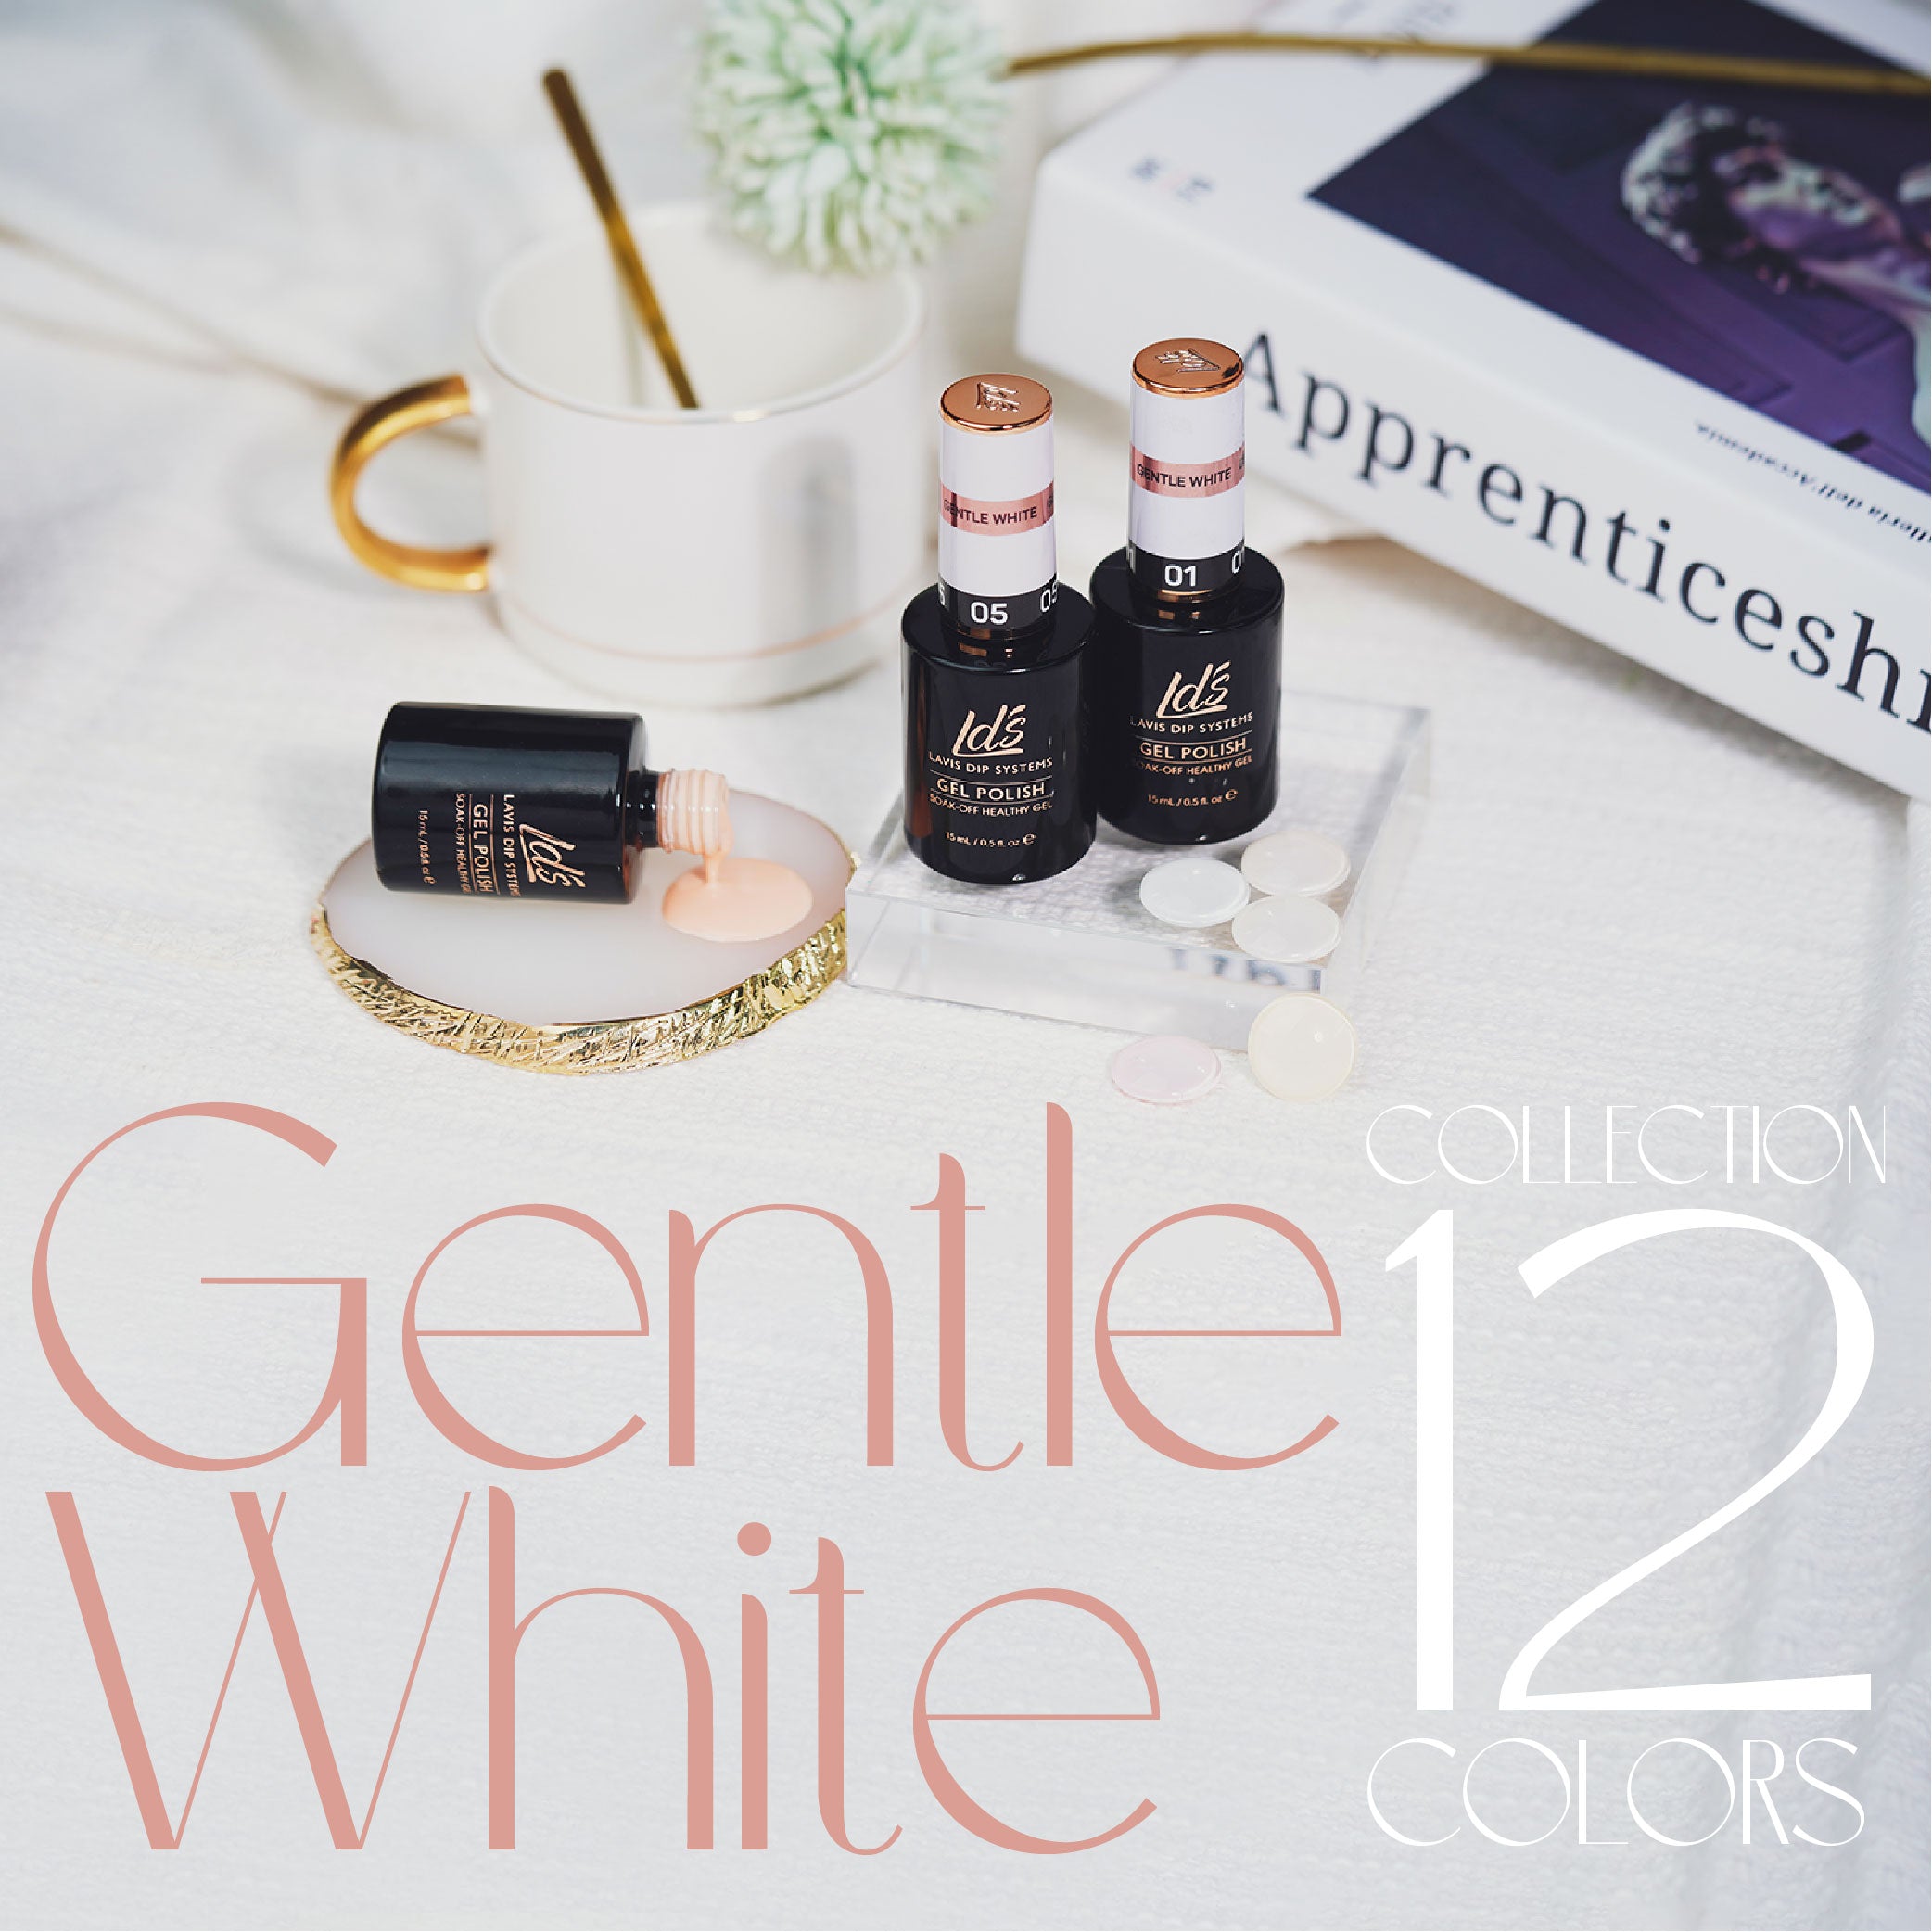  LDS GW - 02 - Gentle White Collection